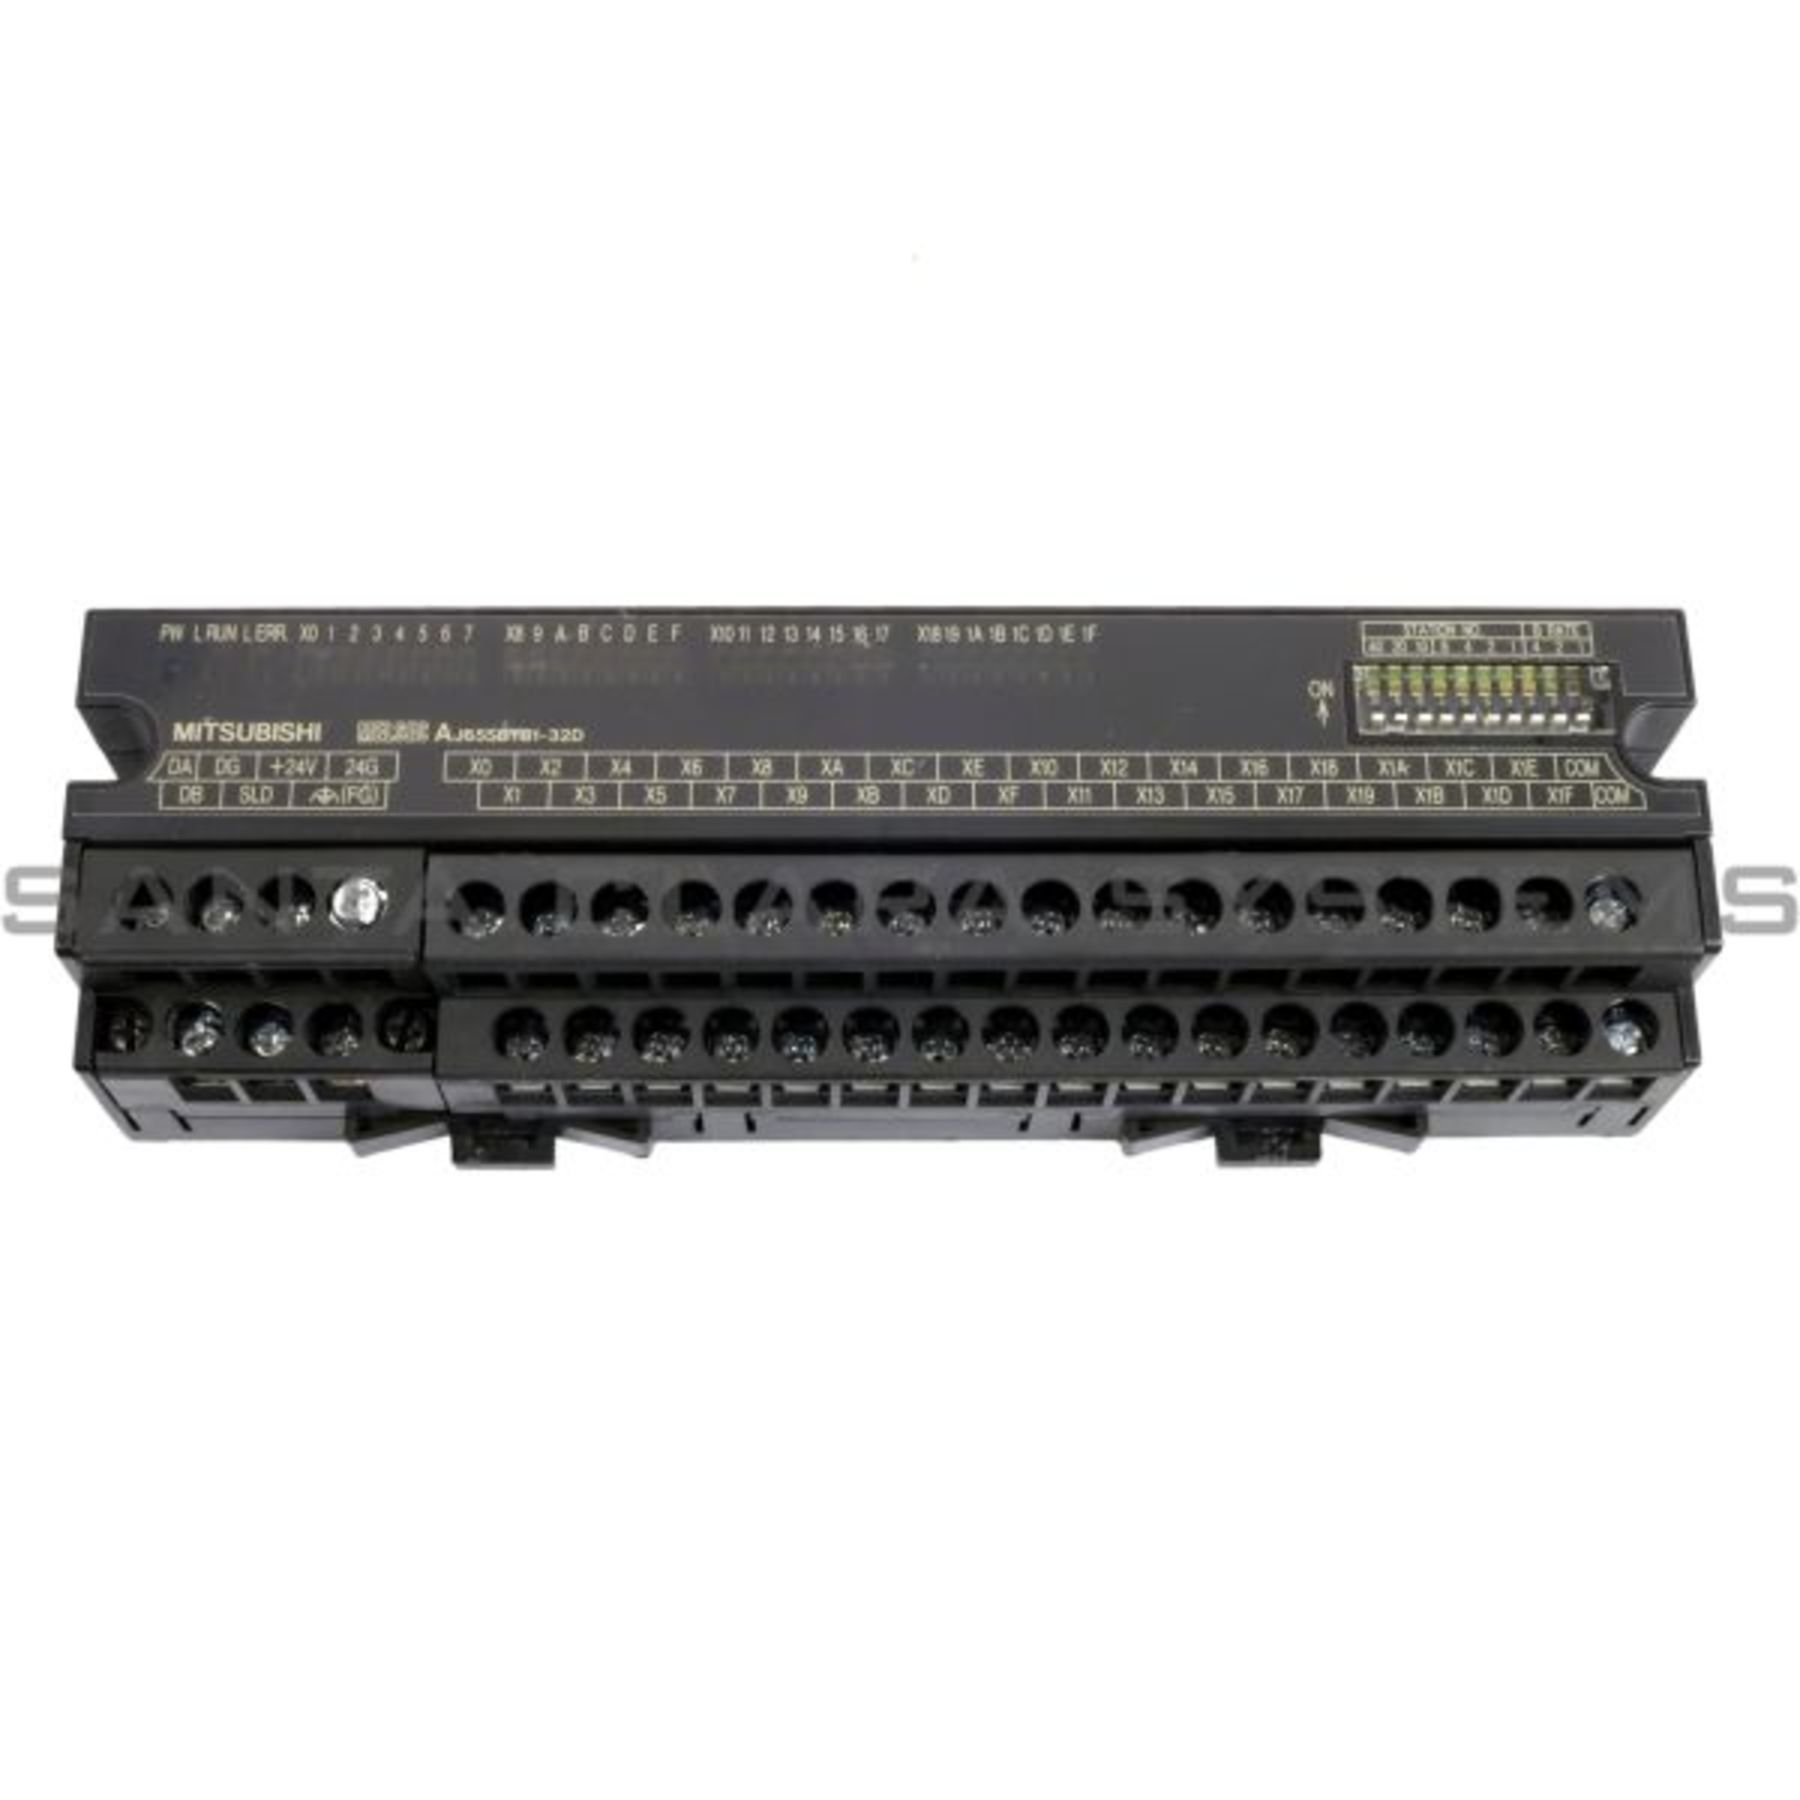 AJ65SBTB1-32D I/O Module CC-Link In stock and ready to ship